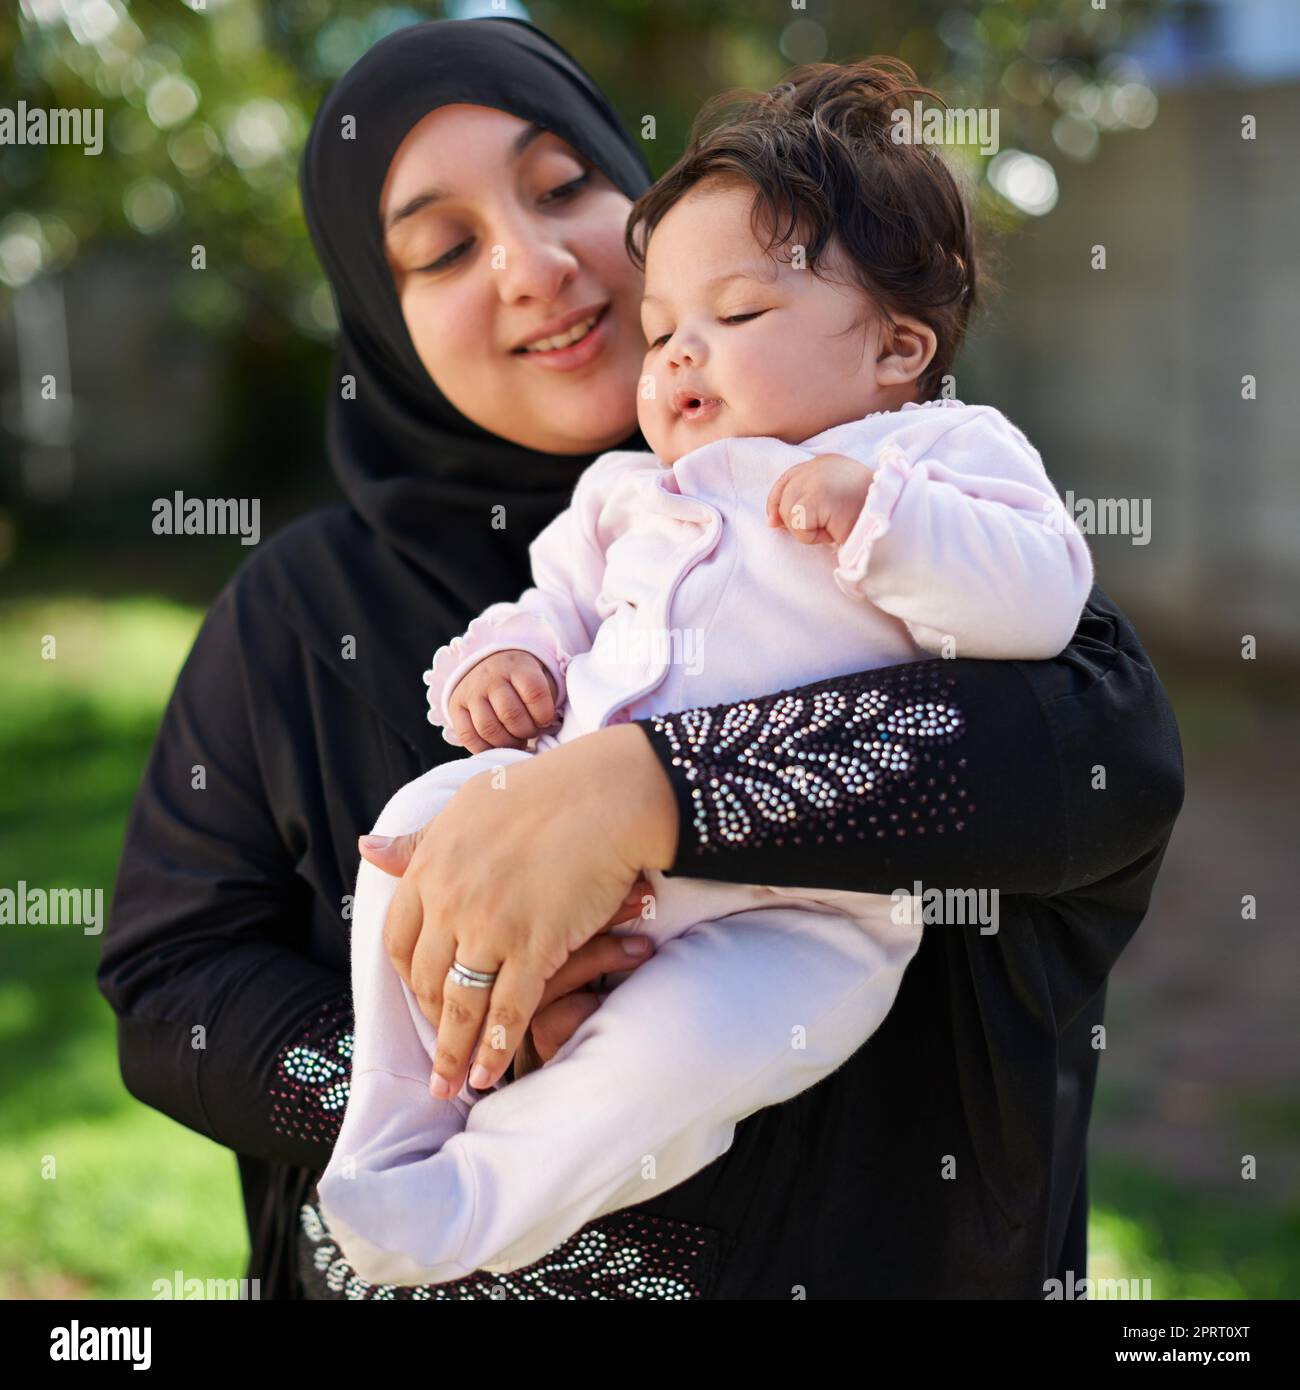 My baby love. a muslim mother and her little baby girl. Stock Photo